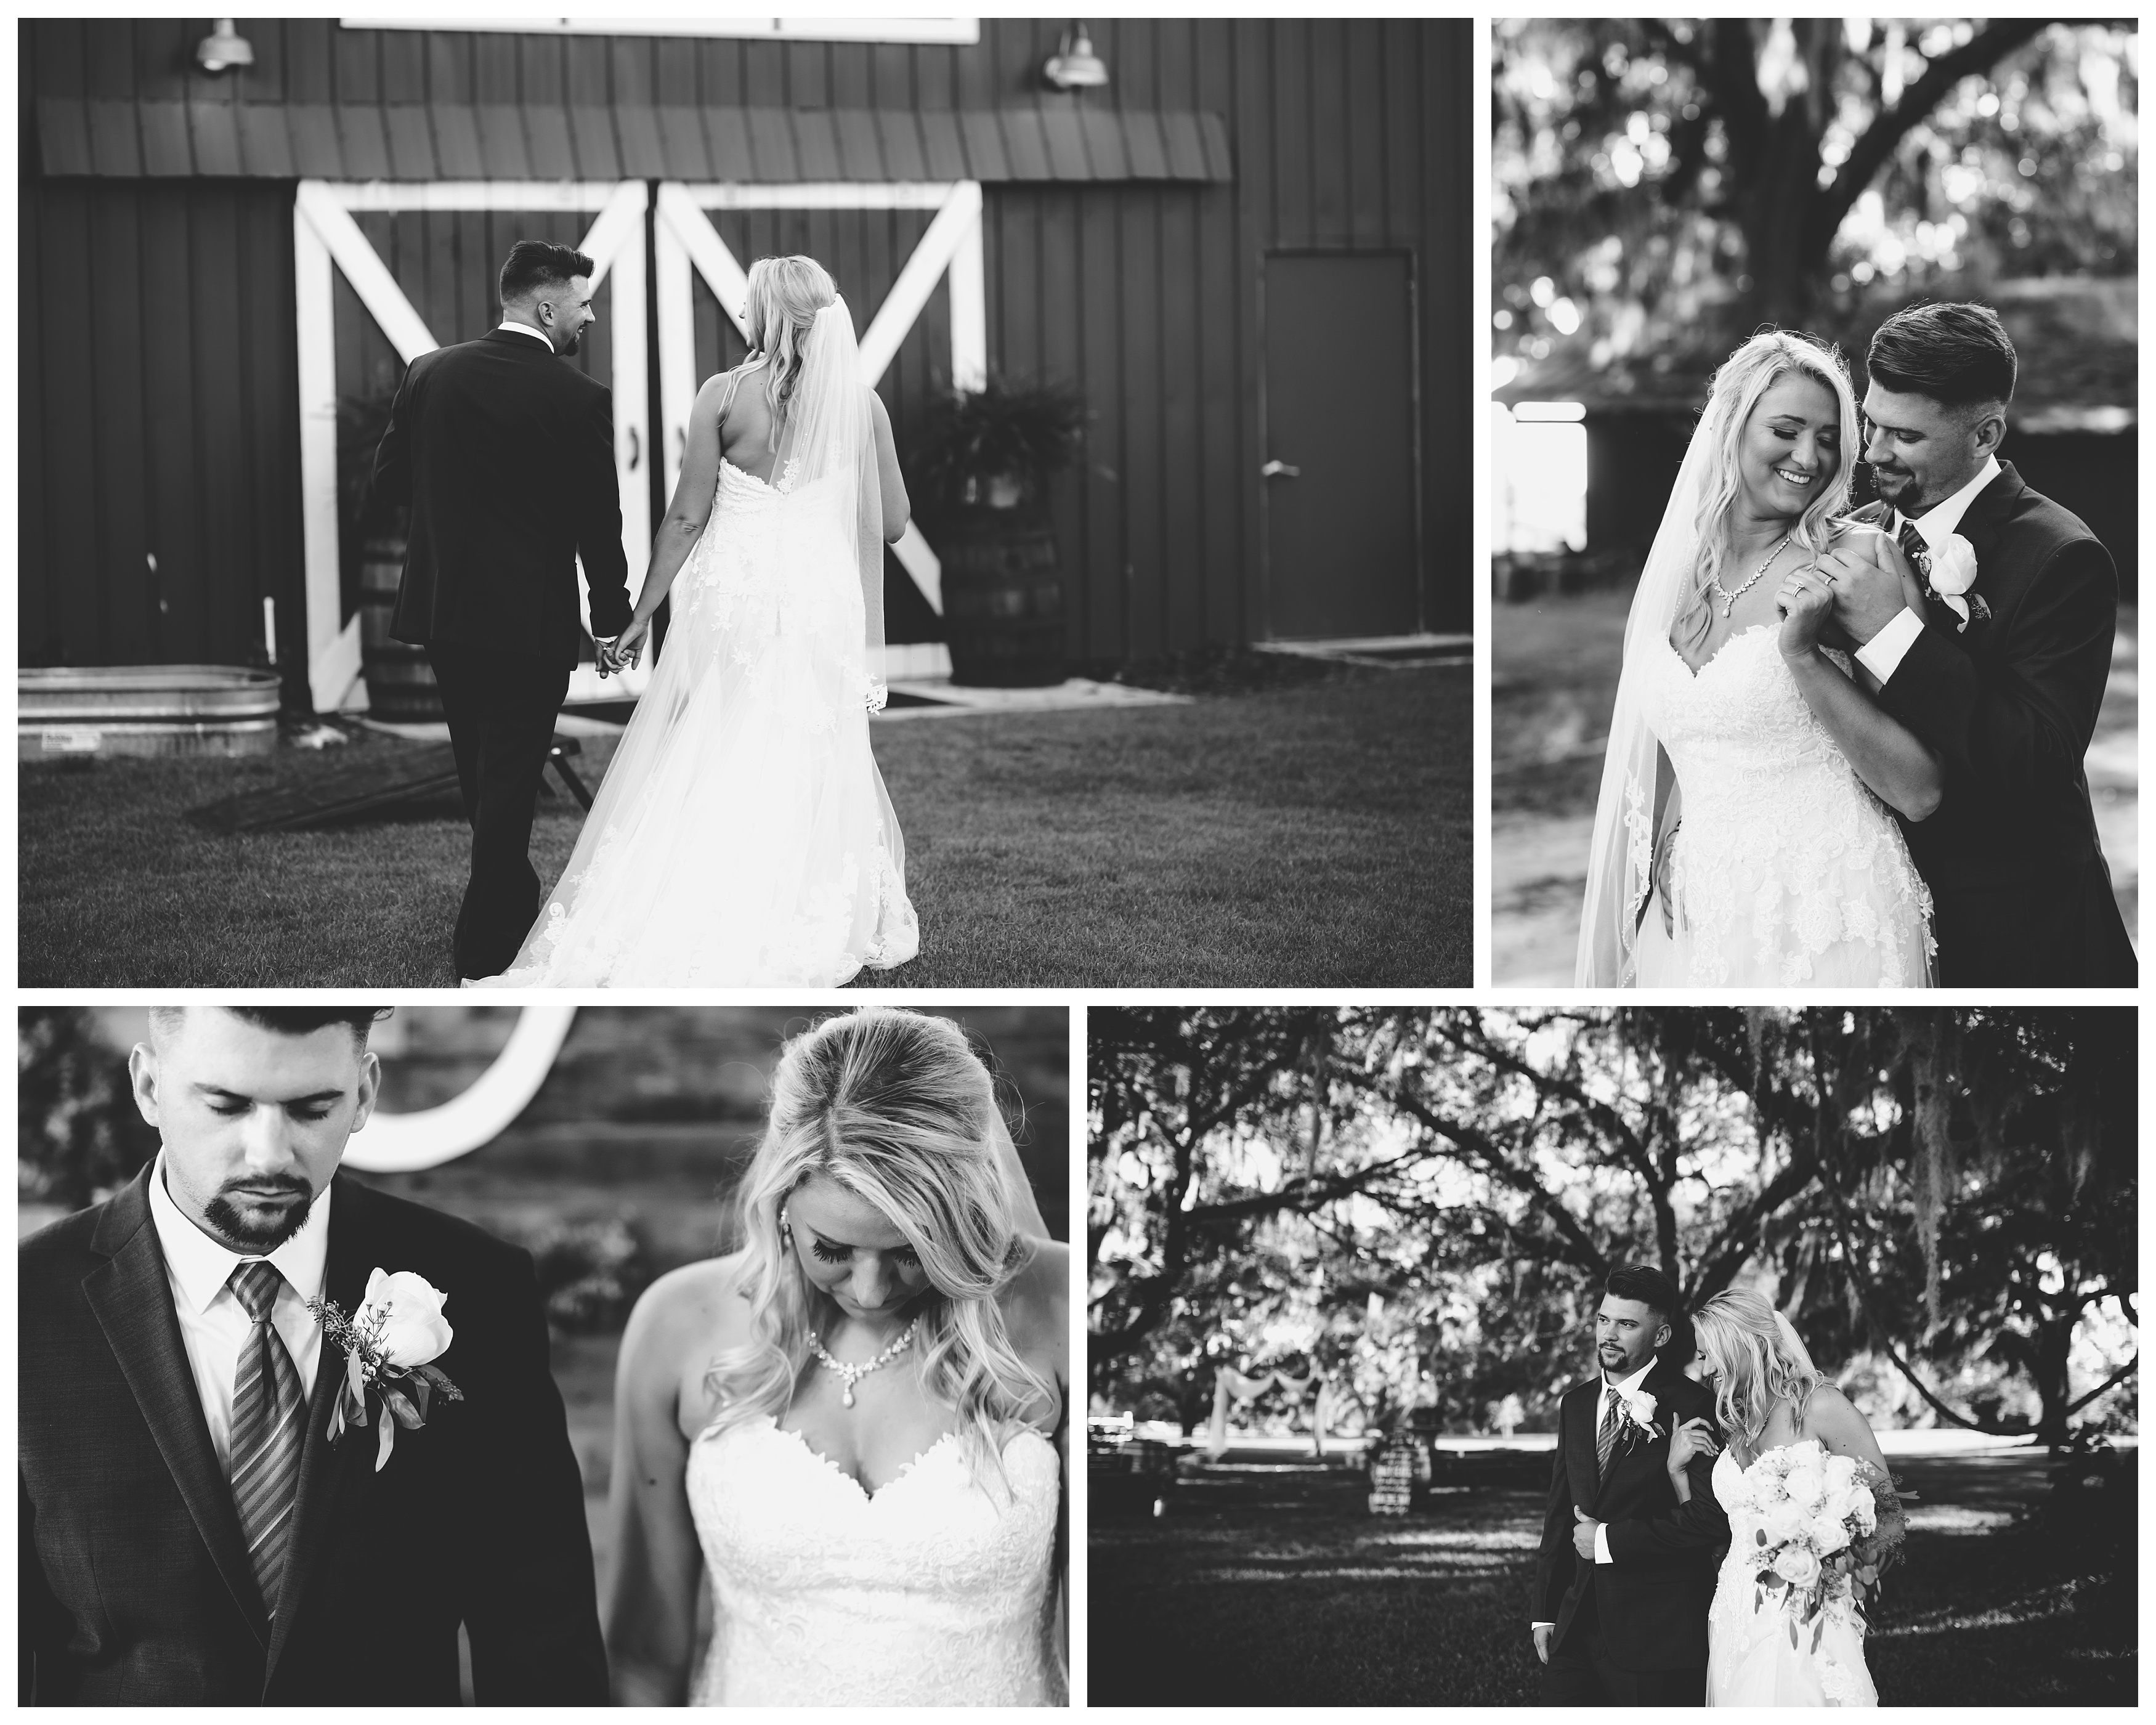 Black and white intimate moments between bride and groom on their wedding day. Shelly Williams Photography located in North Florida.